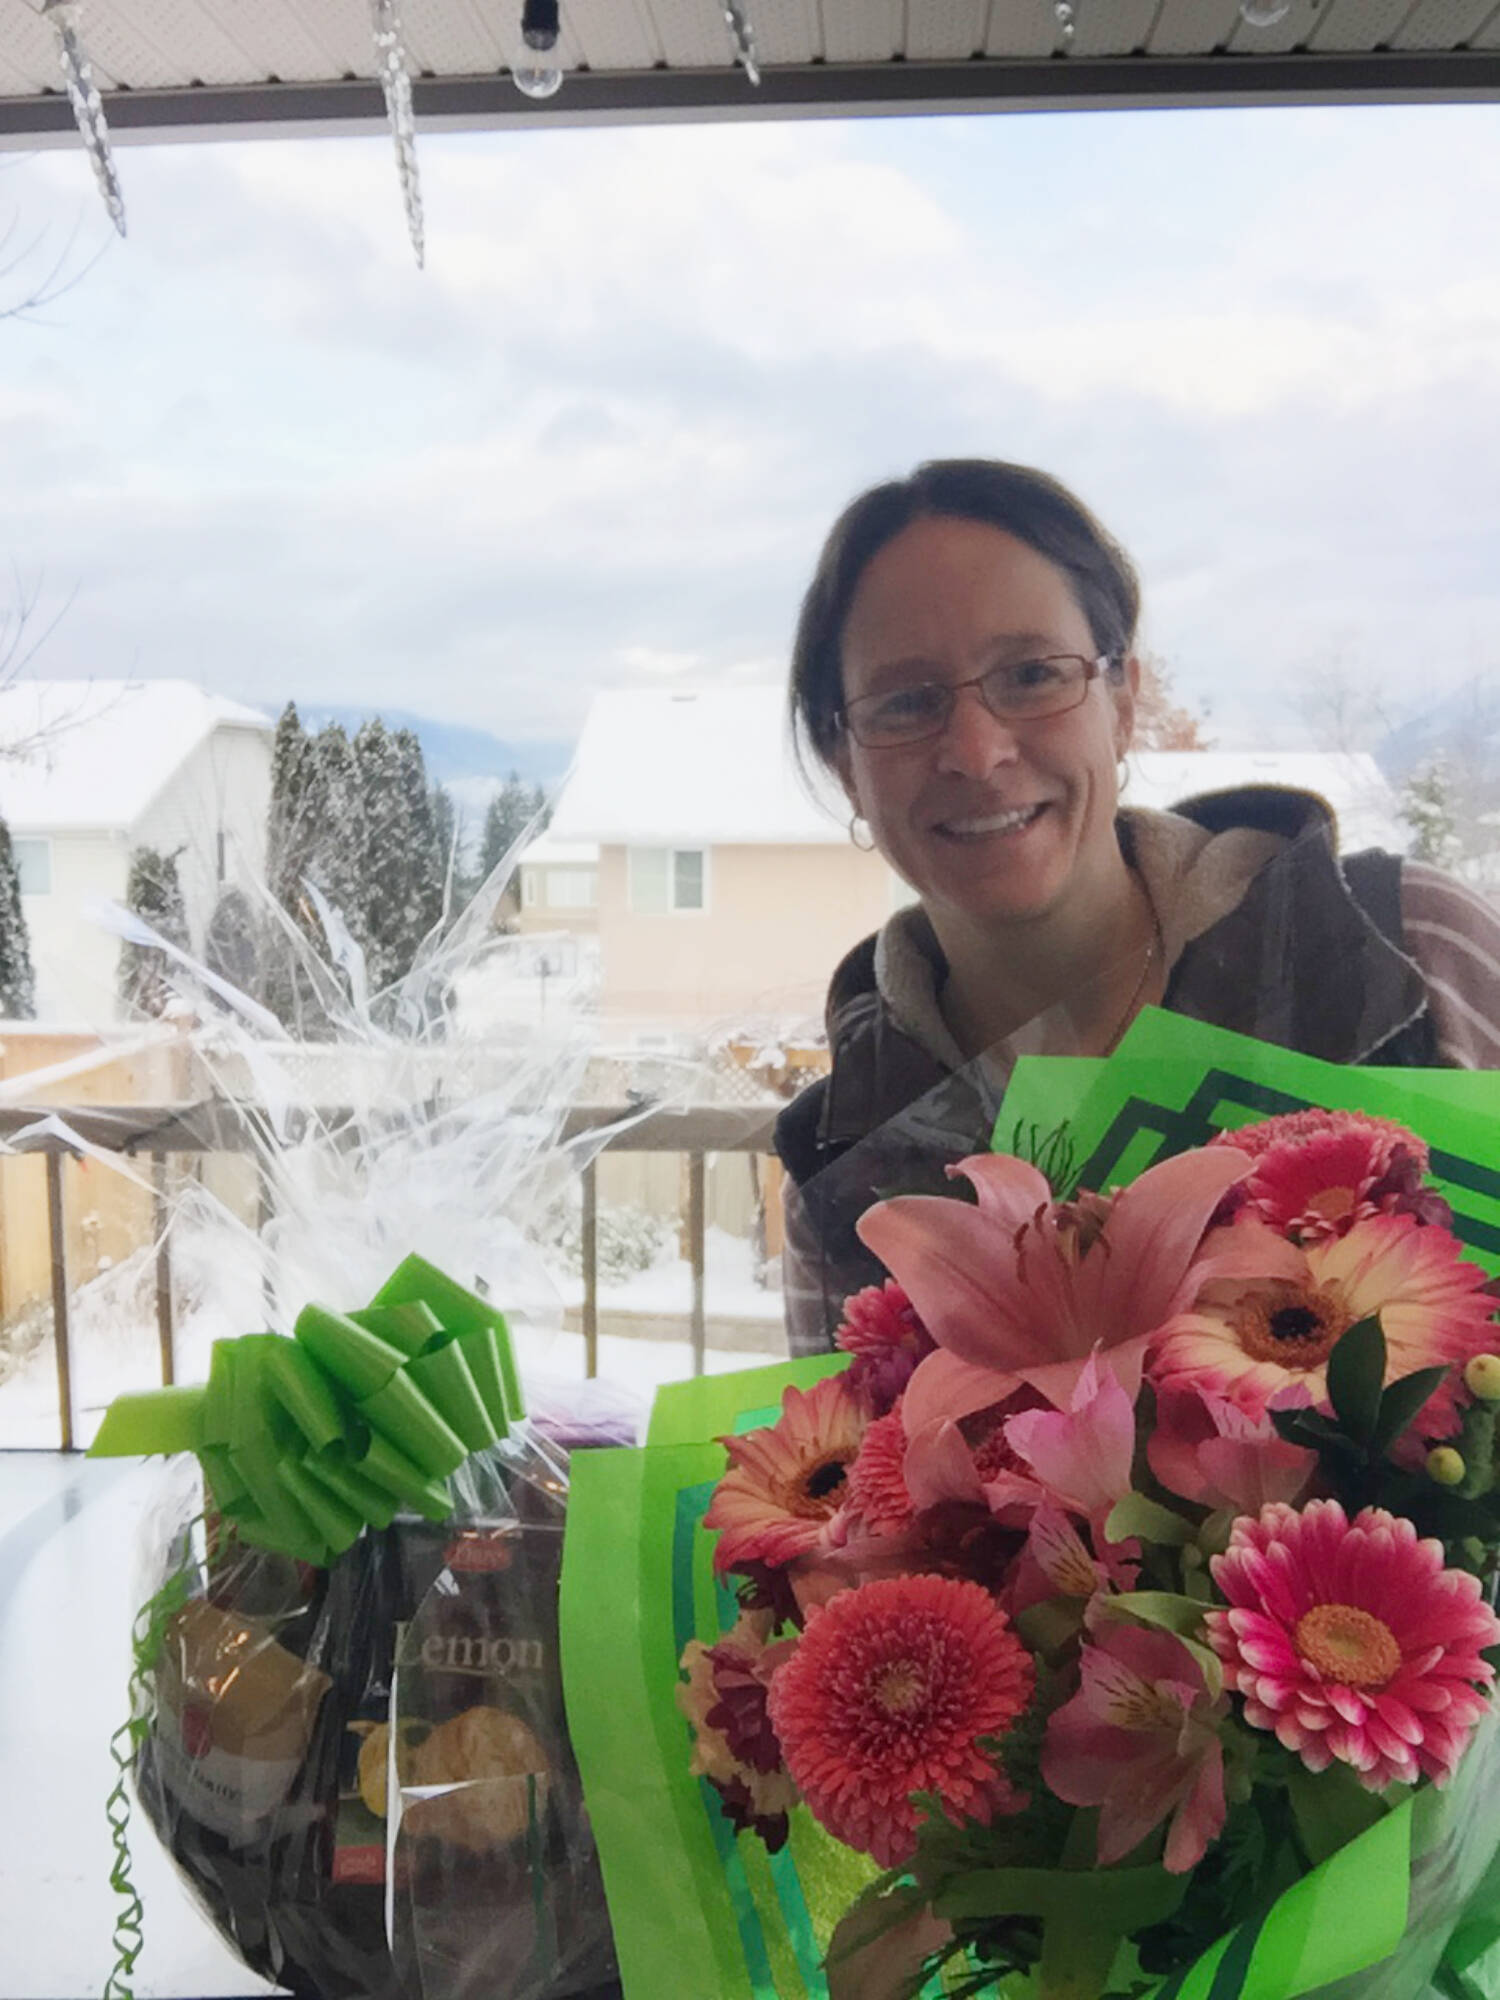 Salmon Arm resident Sara Mitchell was able to locate the intended recipient of a gift basket left at her house on Dec. 5. Now the recipient, Karen Whidden, is trying to find the person who made the initial delivery to say thanks. (Contributed)